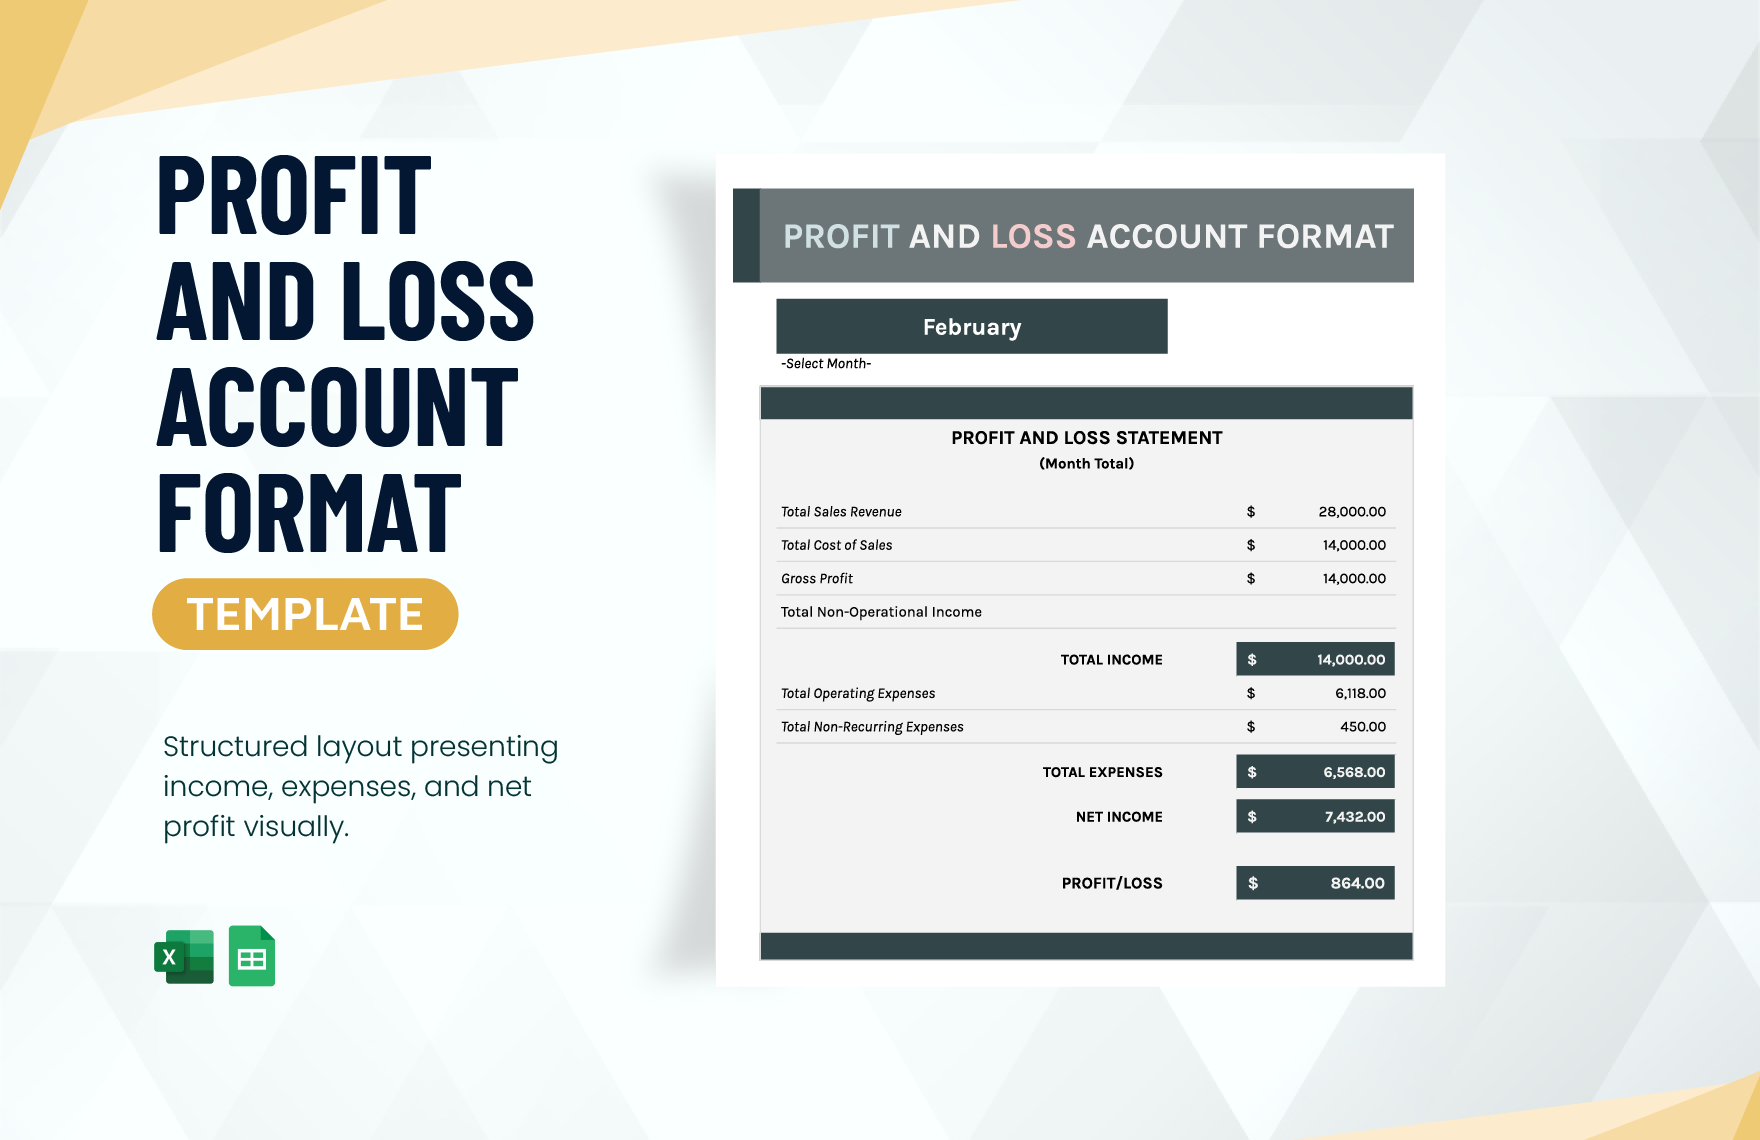 Profit and Loss Account Format Template